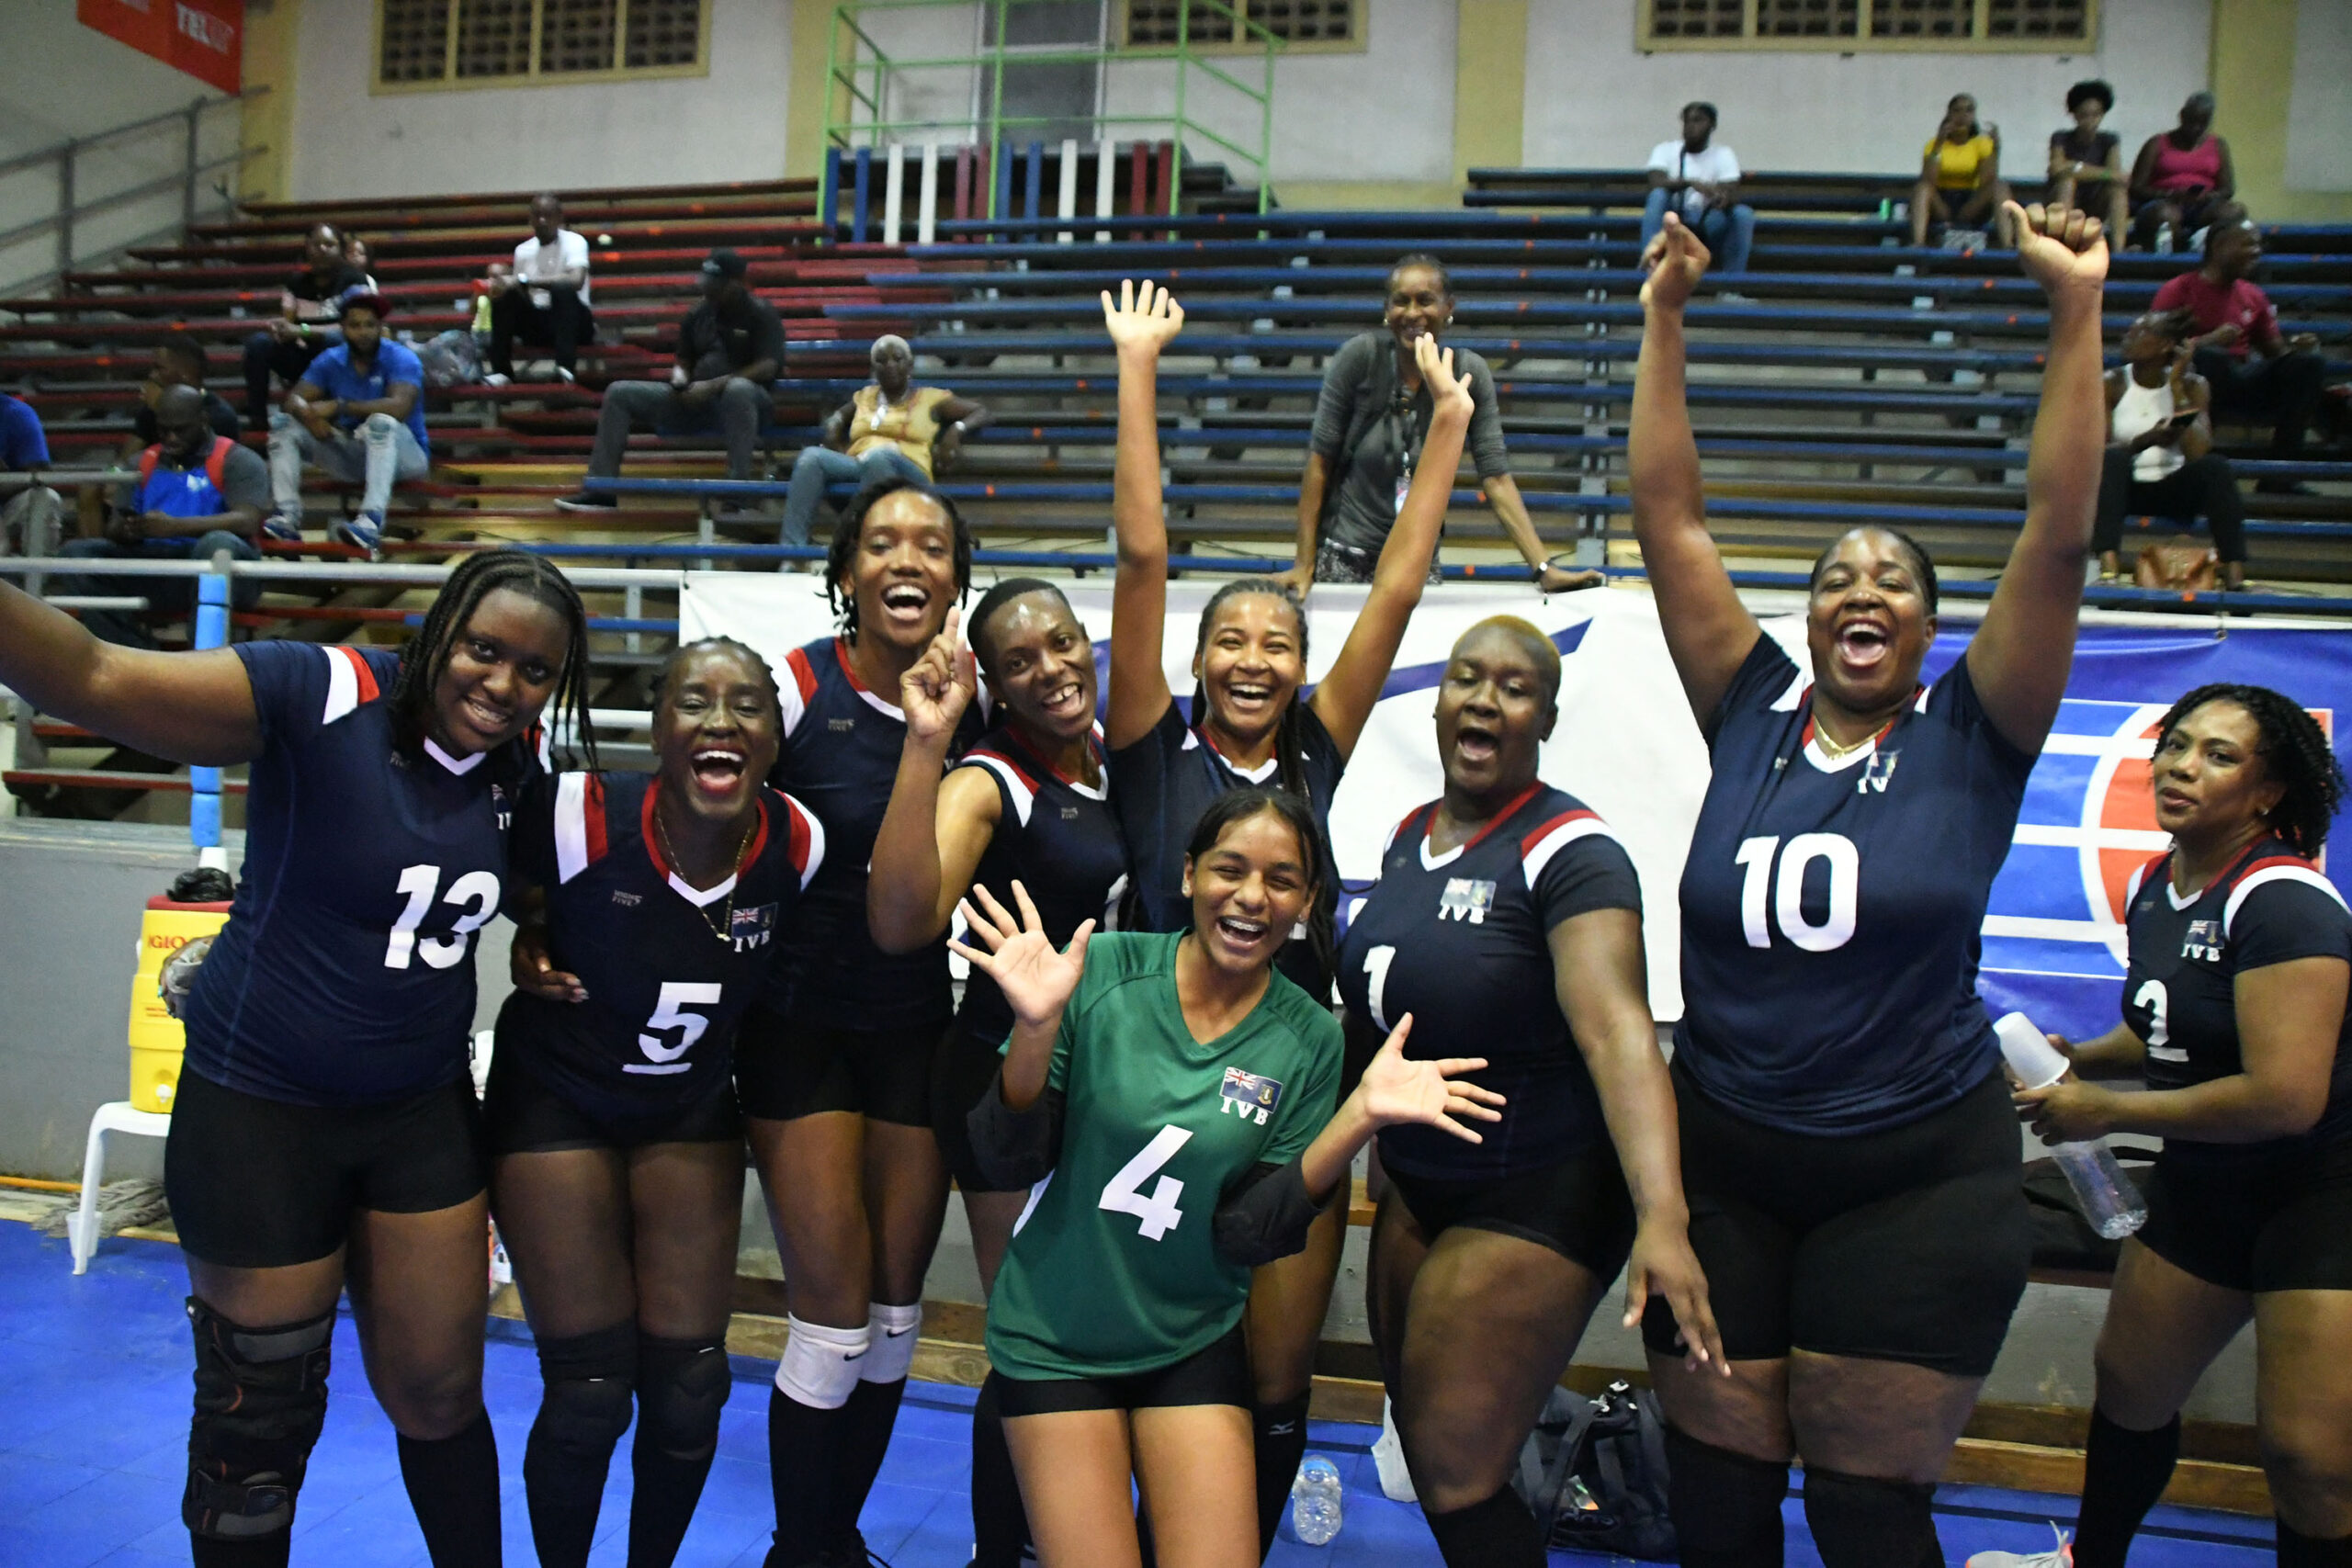 BVI eases into second place in Pool with straight set victory over St. Eustatius